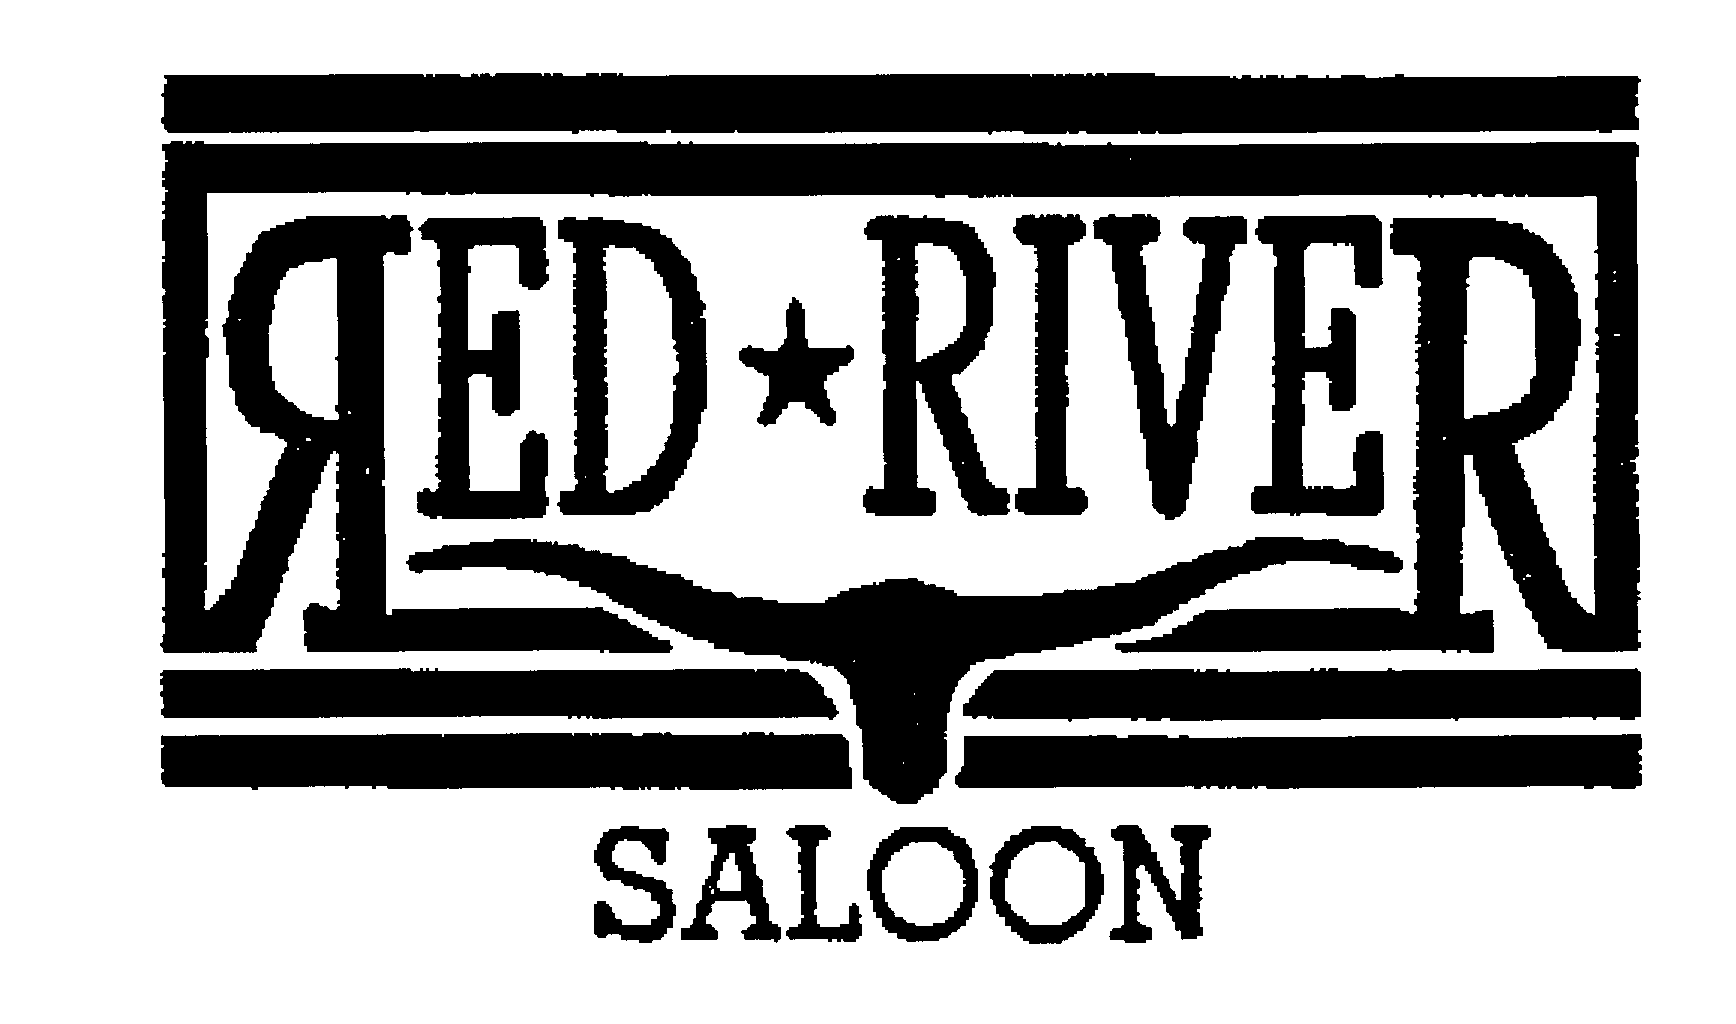  RED RIVER SALOON